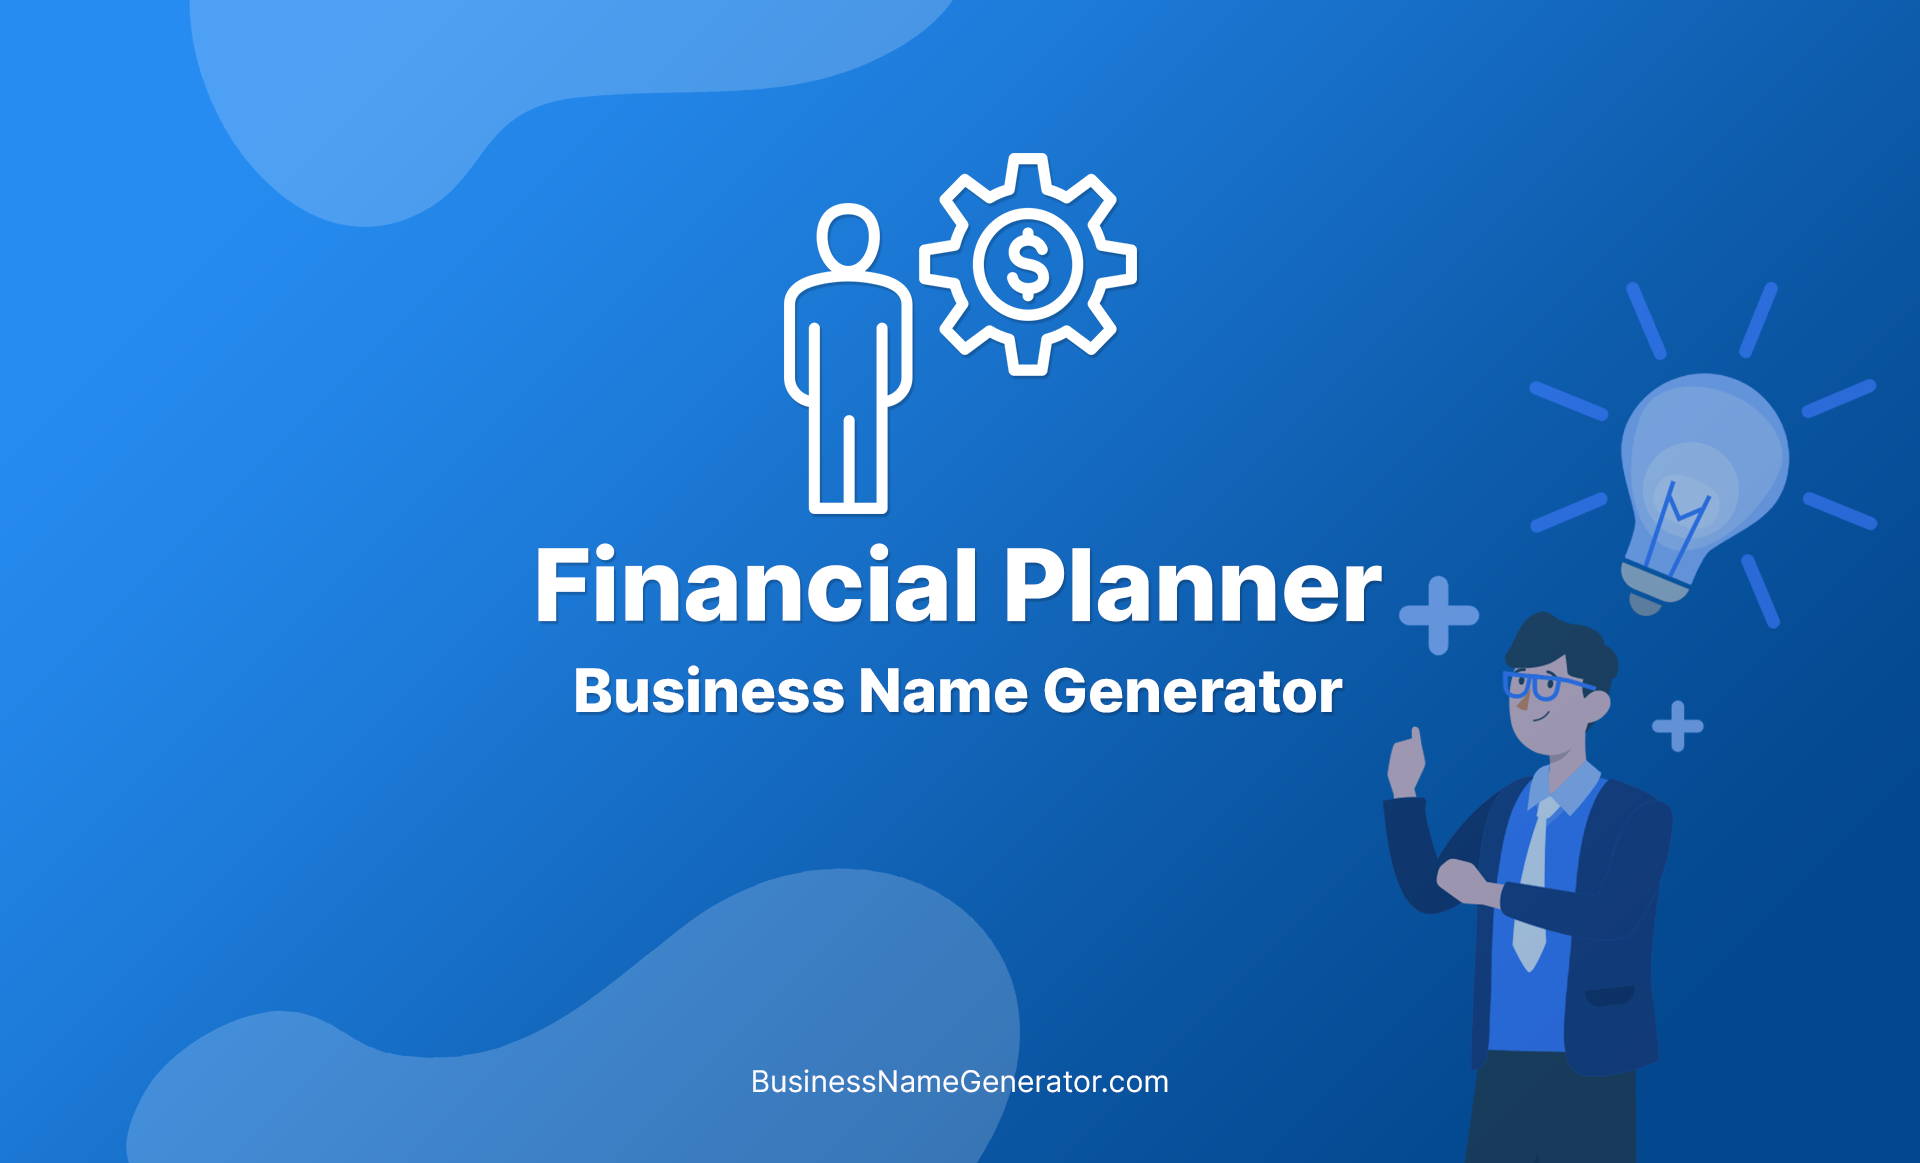 Financial Planner Business Name Generator